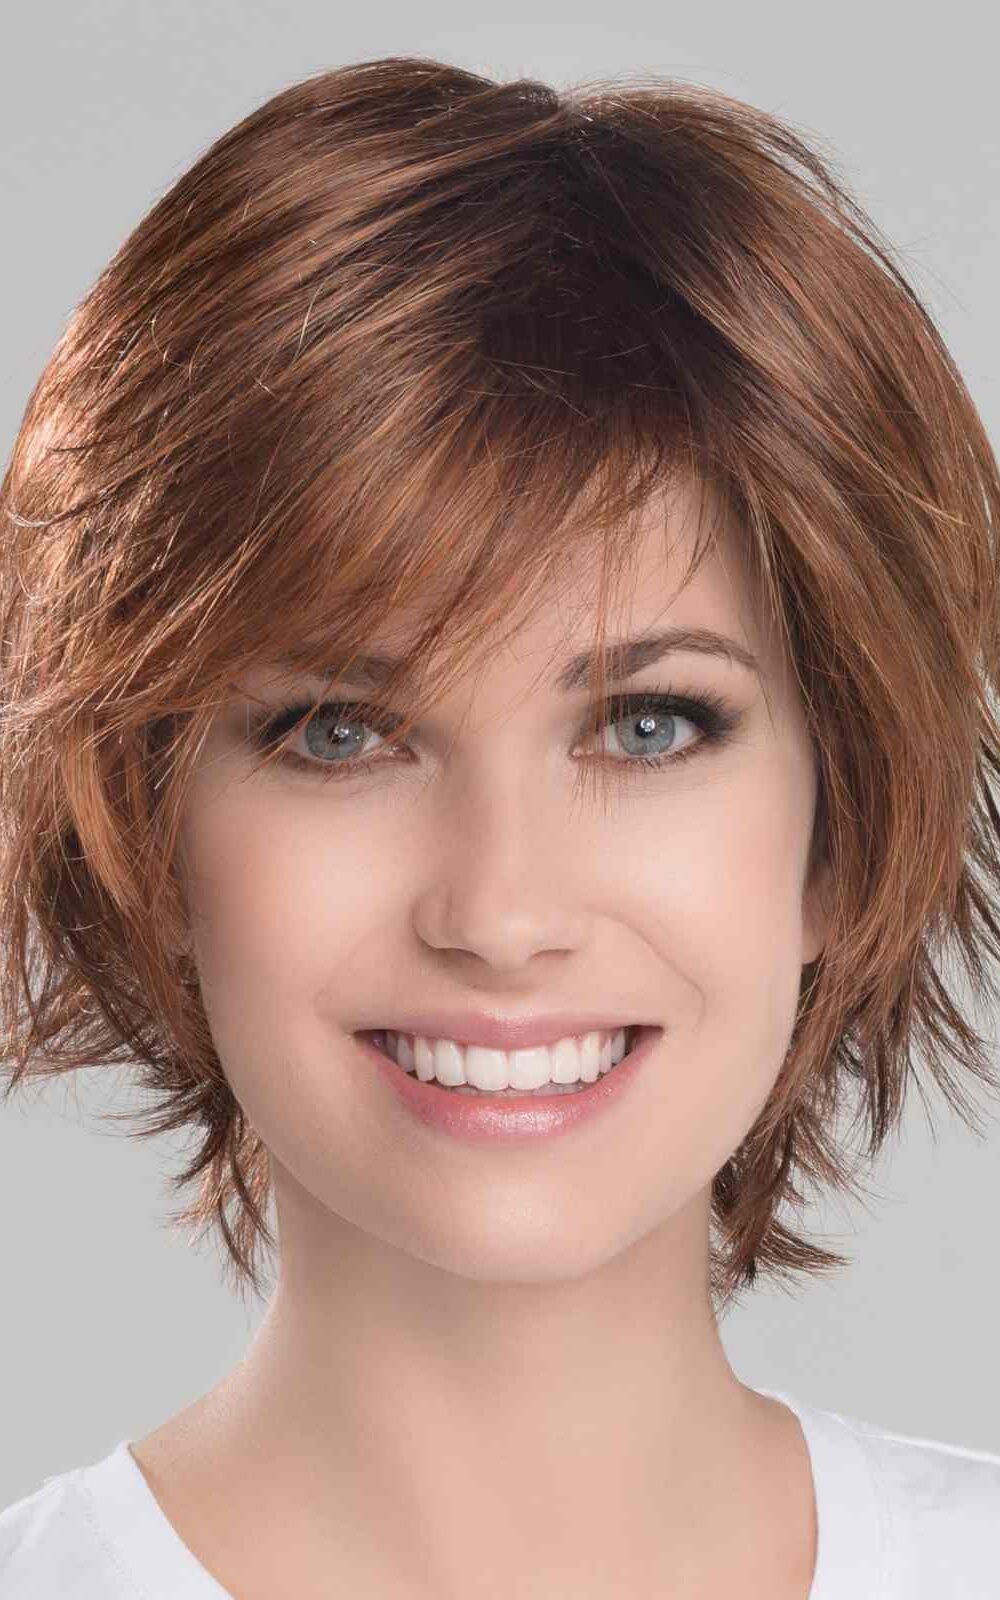 Clever by Wig ELLEN WILLE in Hazelnut Rooted | Medium Brown base with Medium Reddish Brown and Copper Red highlights and Dark Roots | Elly-K.com.au